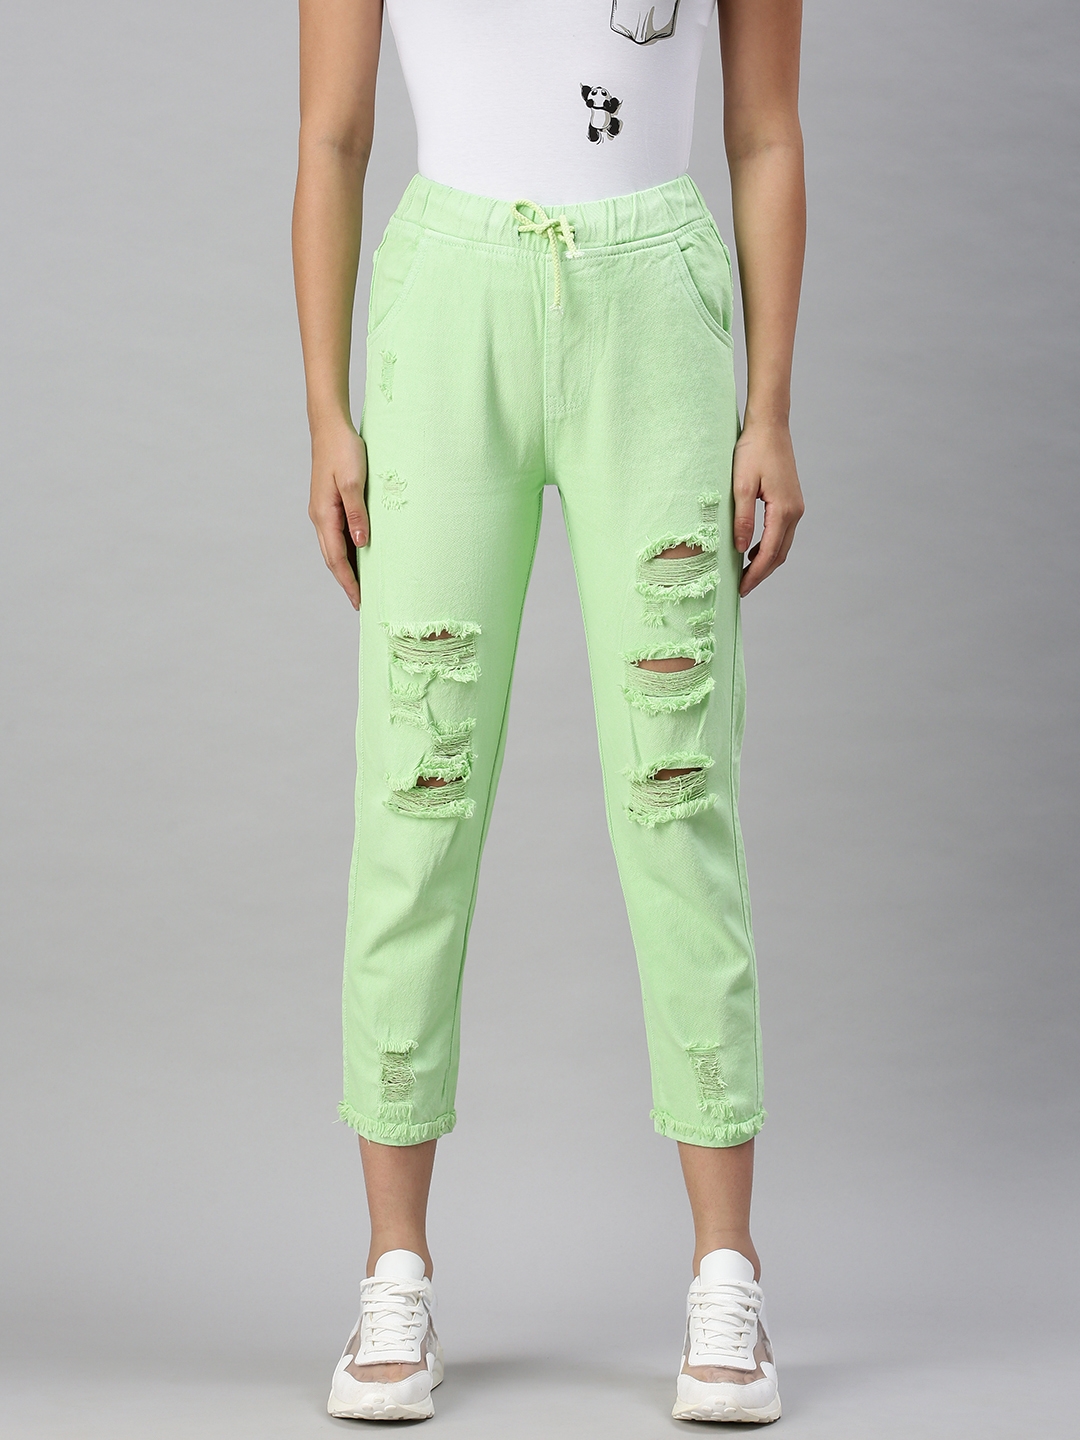 Showoff Women's Casual Jogger High-Rise Lime Green Jeans